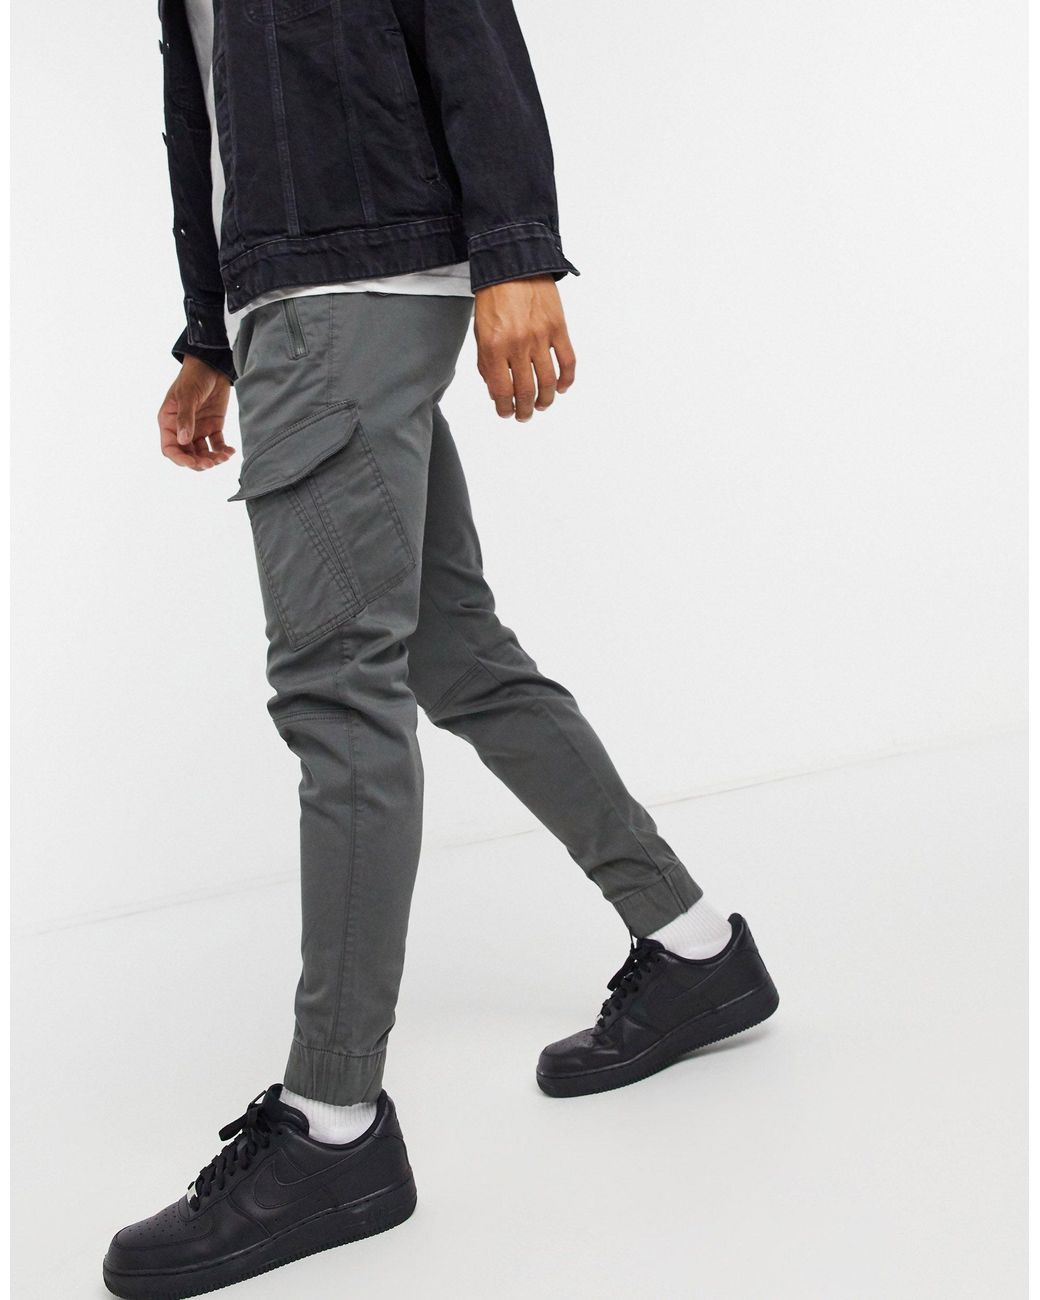 Hollister Utility Cargo Cuffed joggers for Men